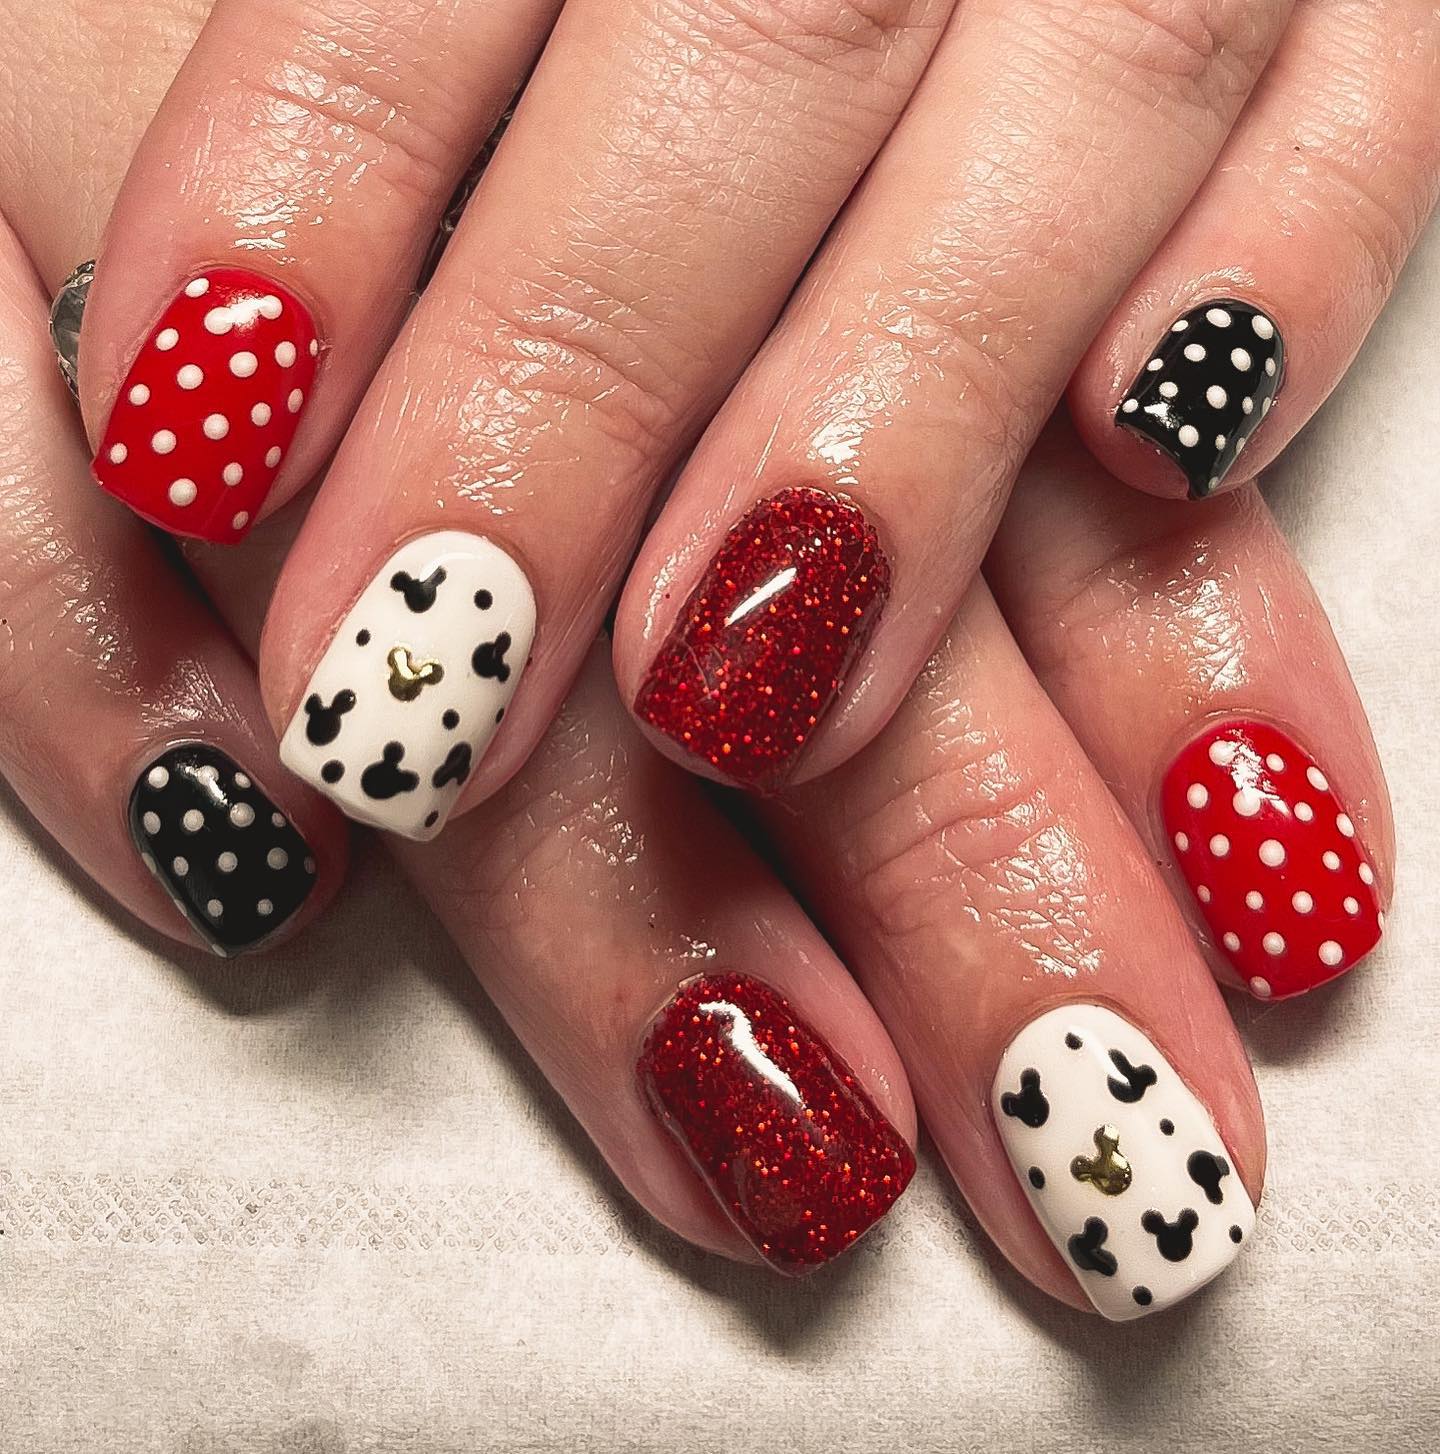 Disney Red and White Nails with Mickey Mouse